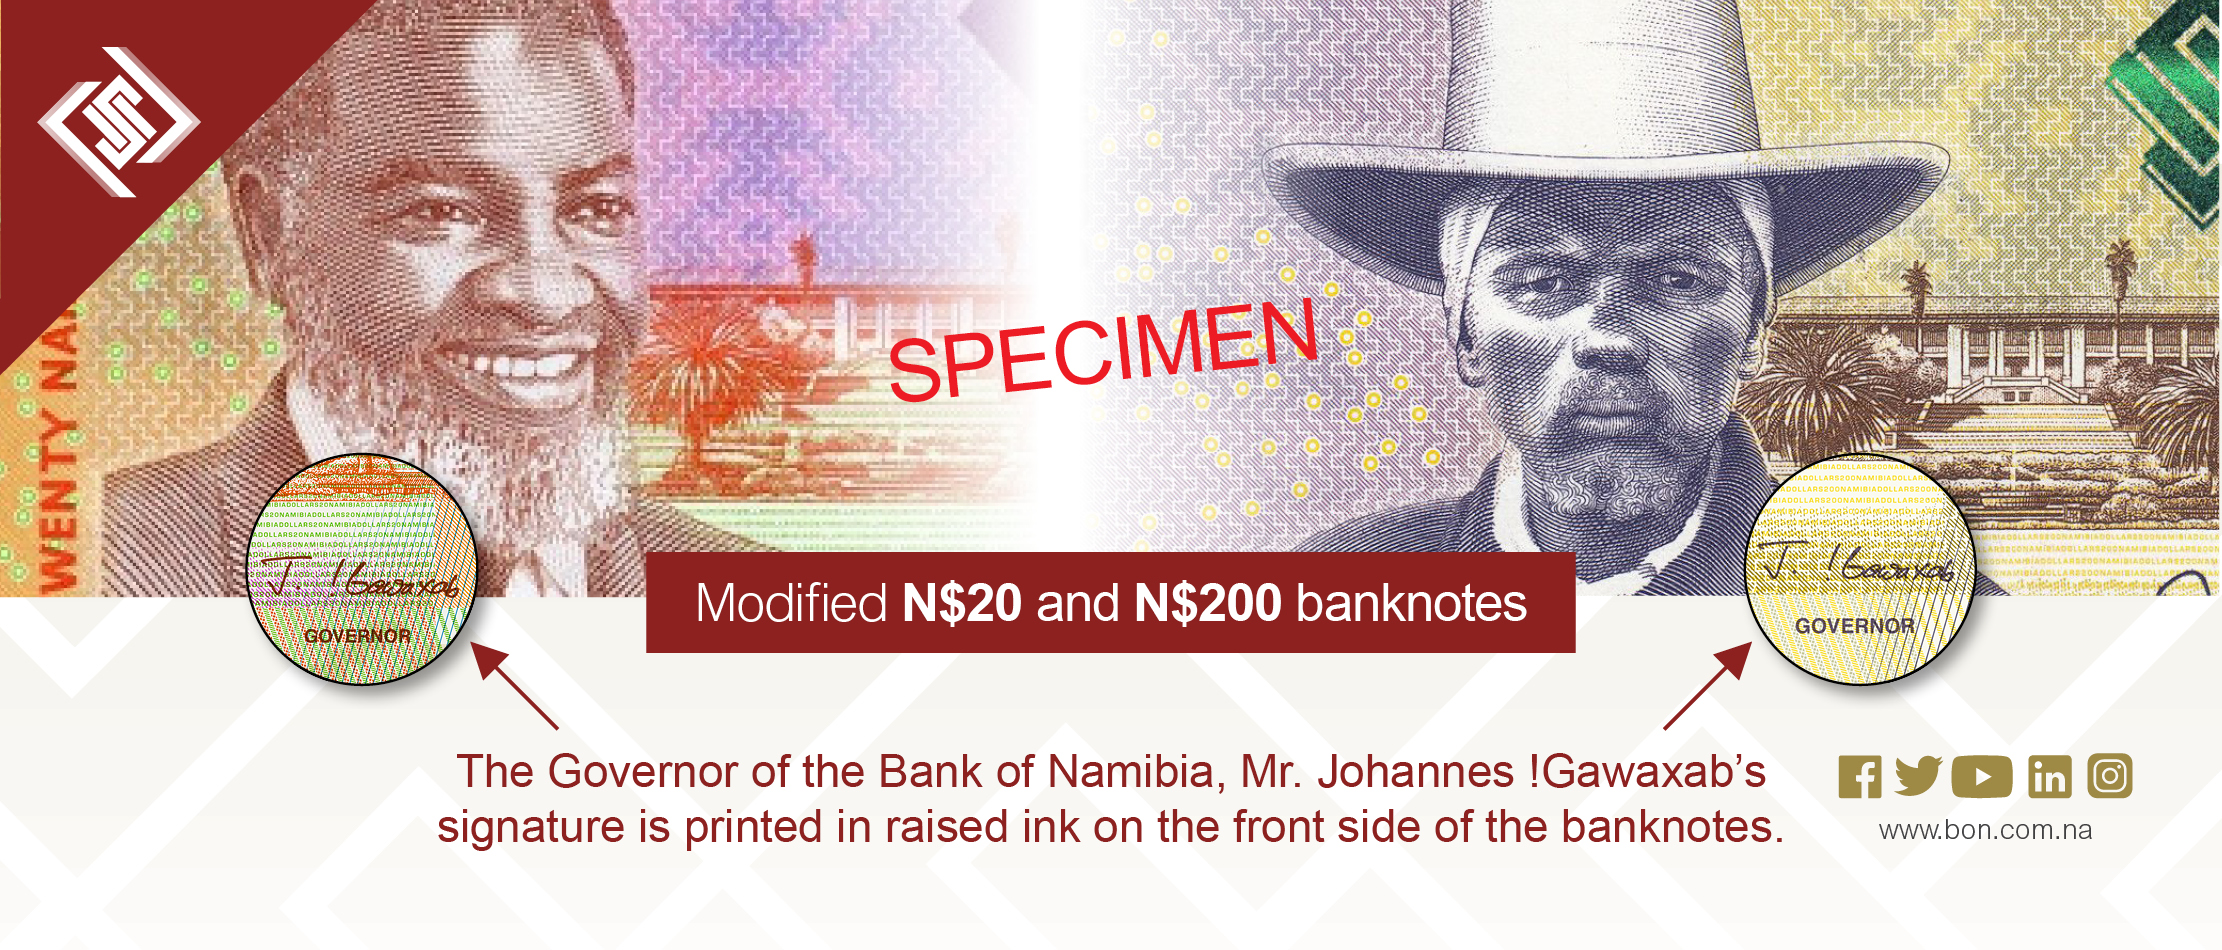 21-02-2023 Launch of modified N$ 20 and N$ 200 banknotes